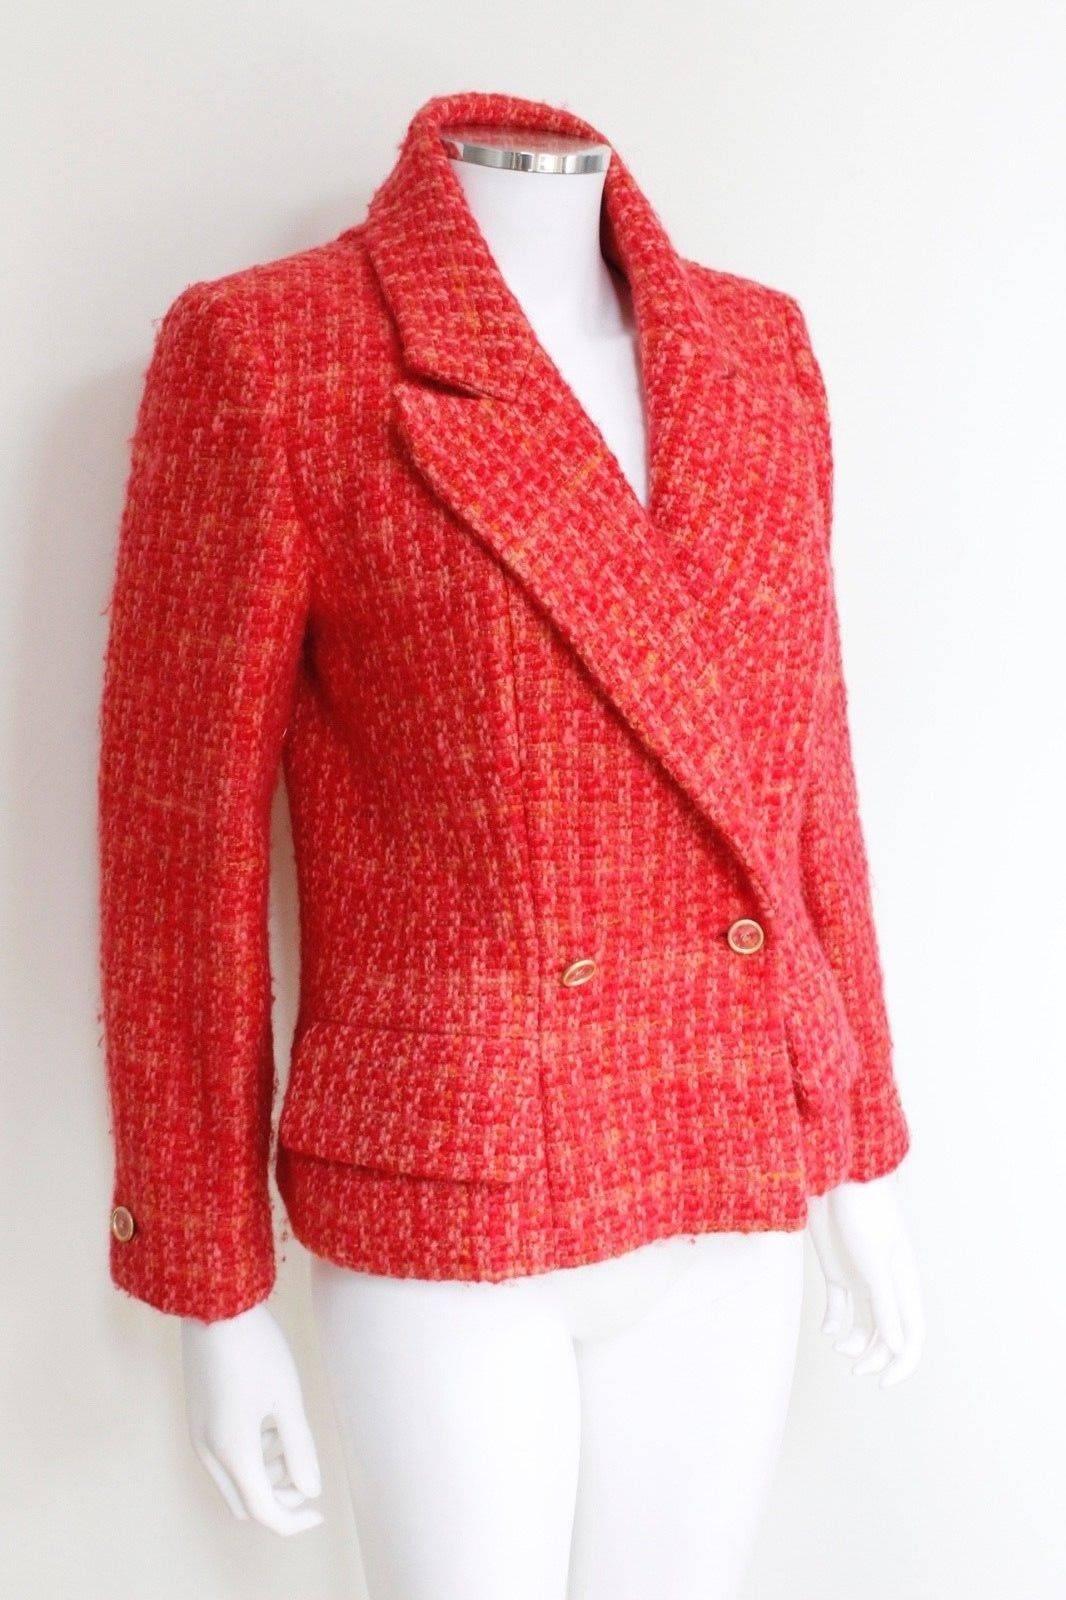 Authentic Chanel Red Tweed Jacket F 40 uk 12   In Excellent Condition For Sale In London, GB